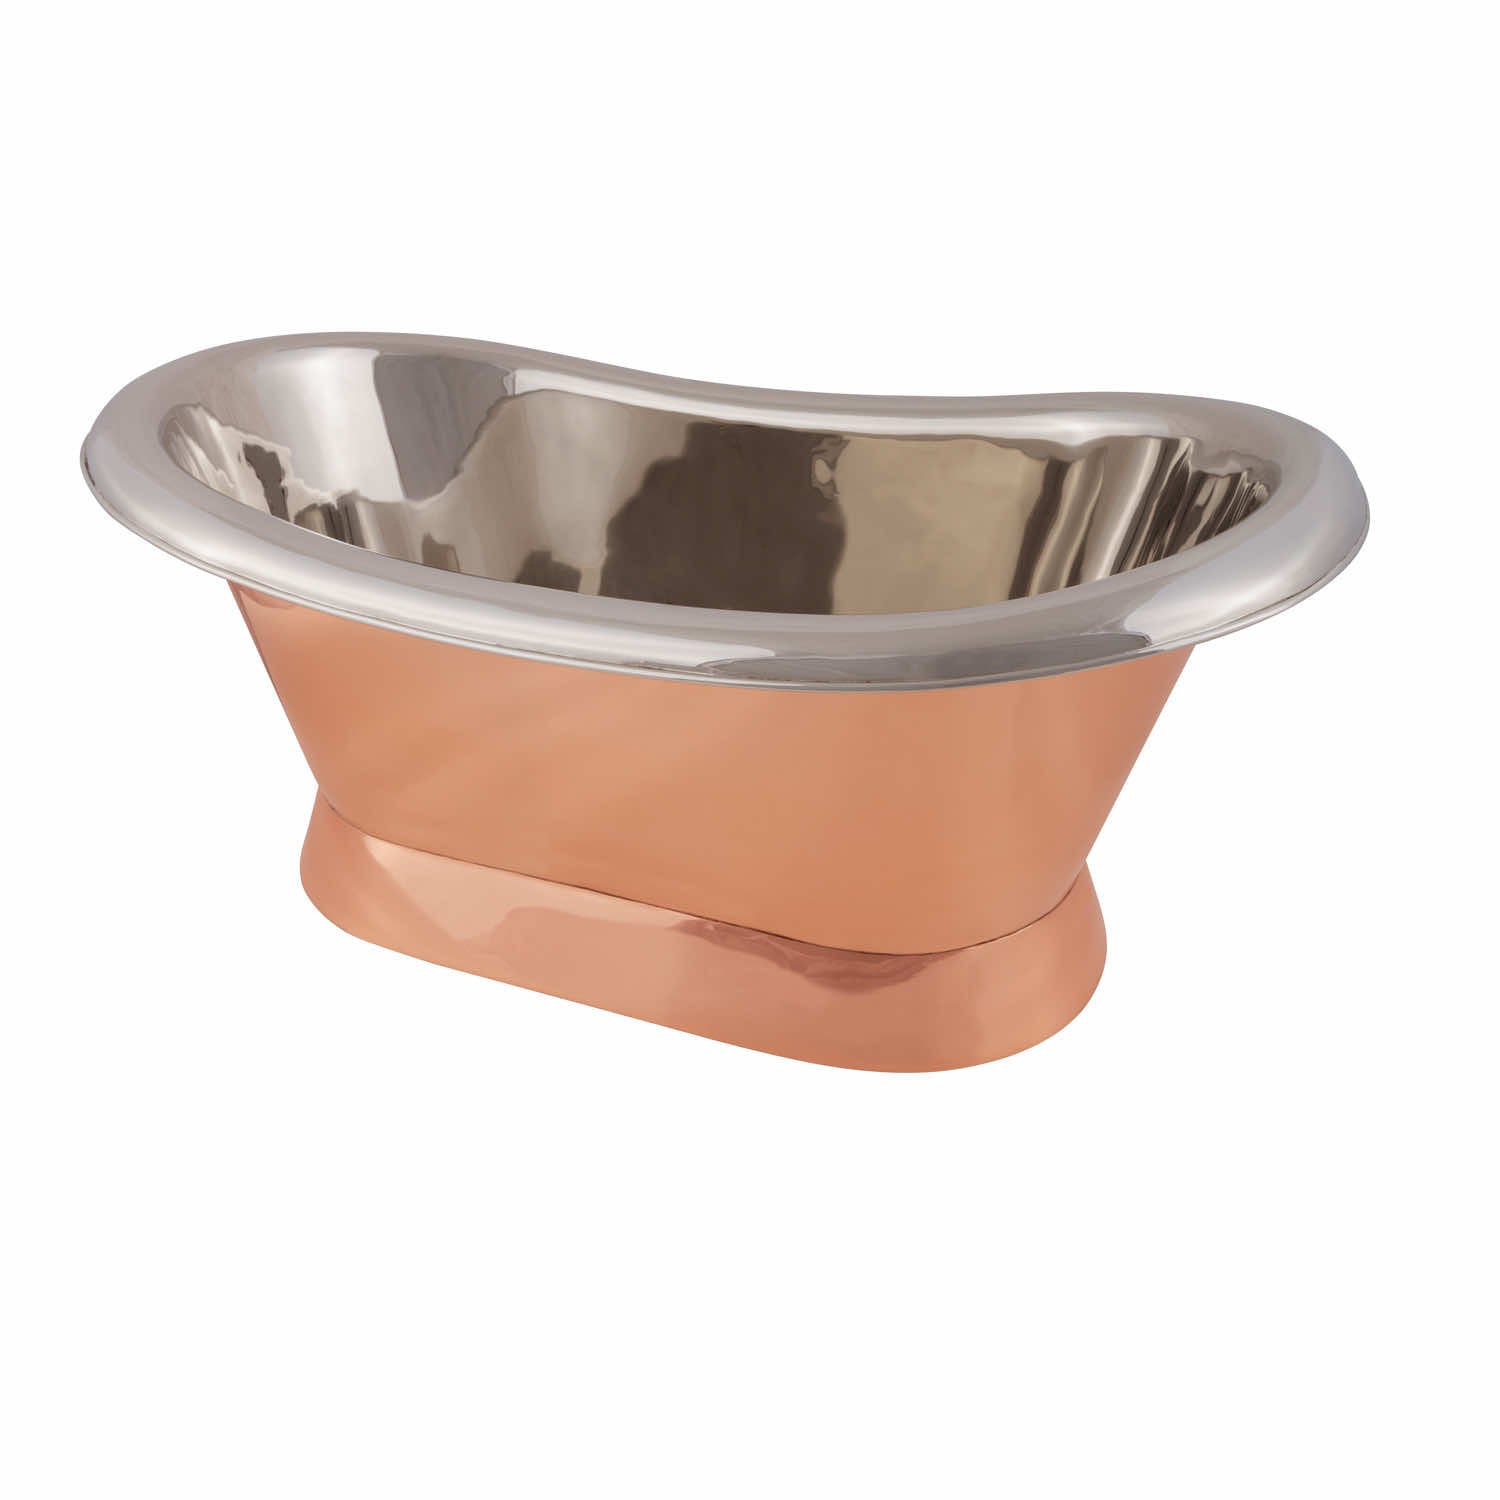 Genuine Copper Bulle Basin With Roll Top with a Nickel Interior